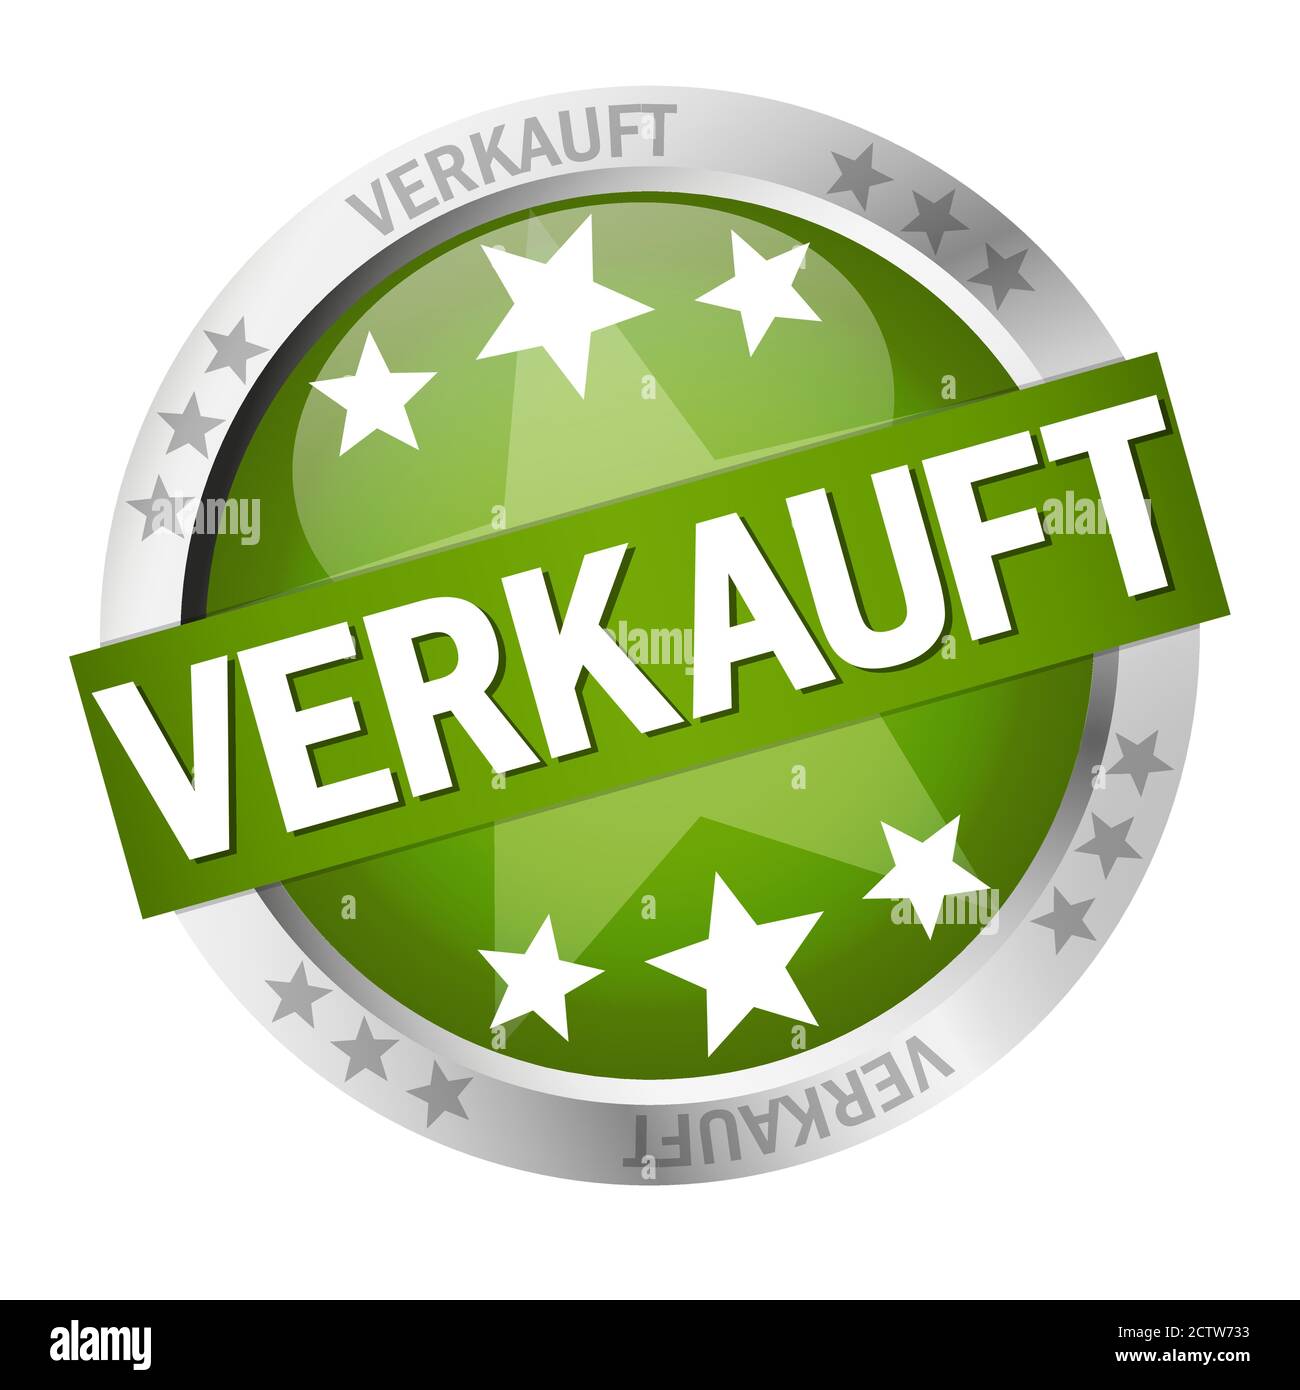 round colored button with banner and text Verkauft Stock Vector